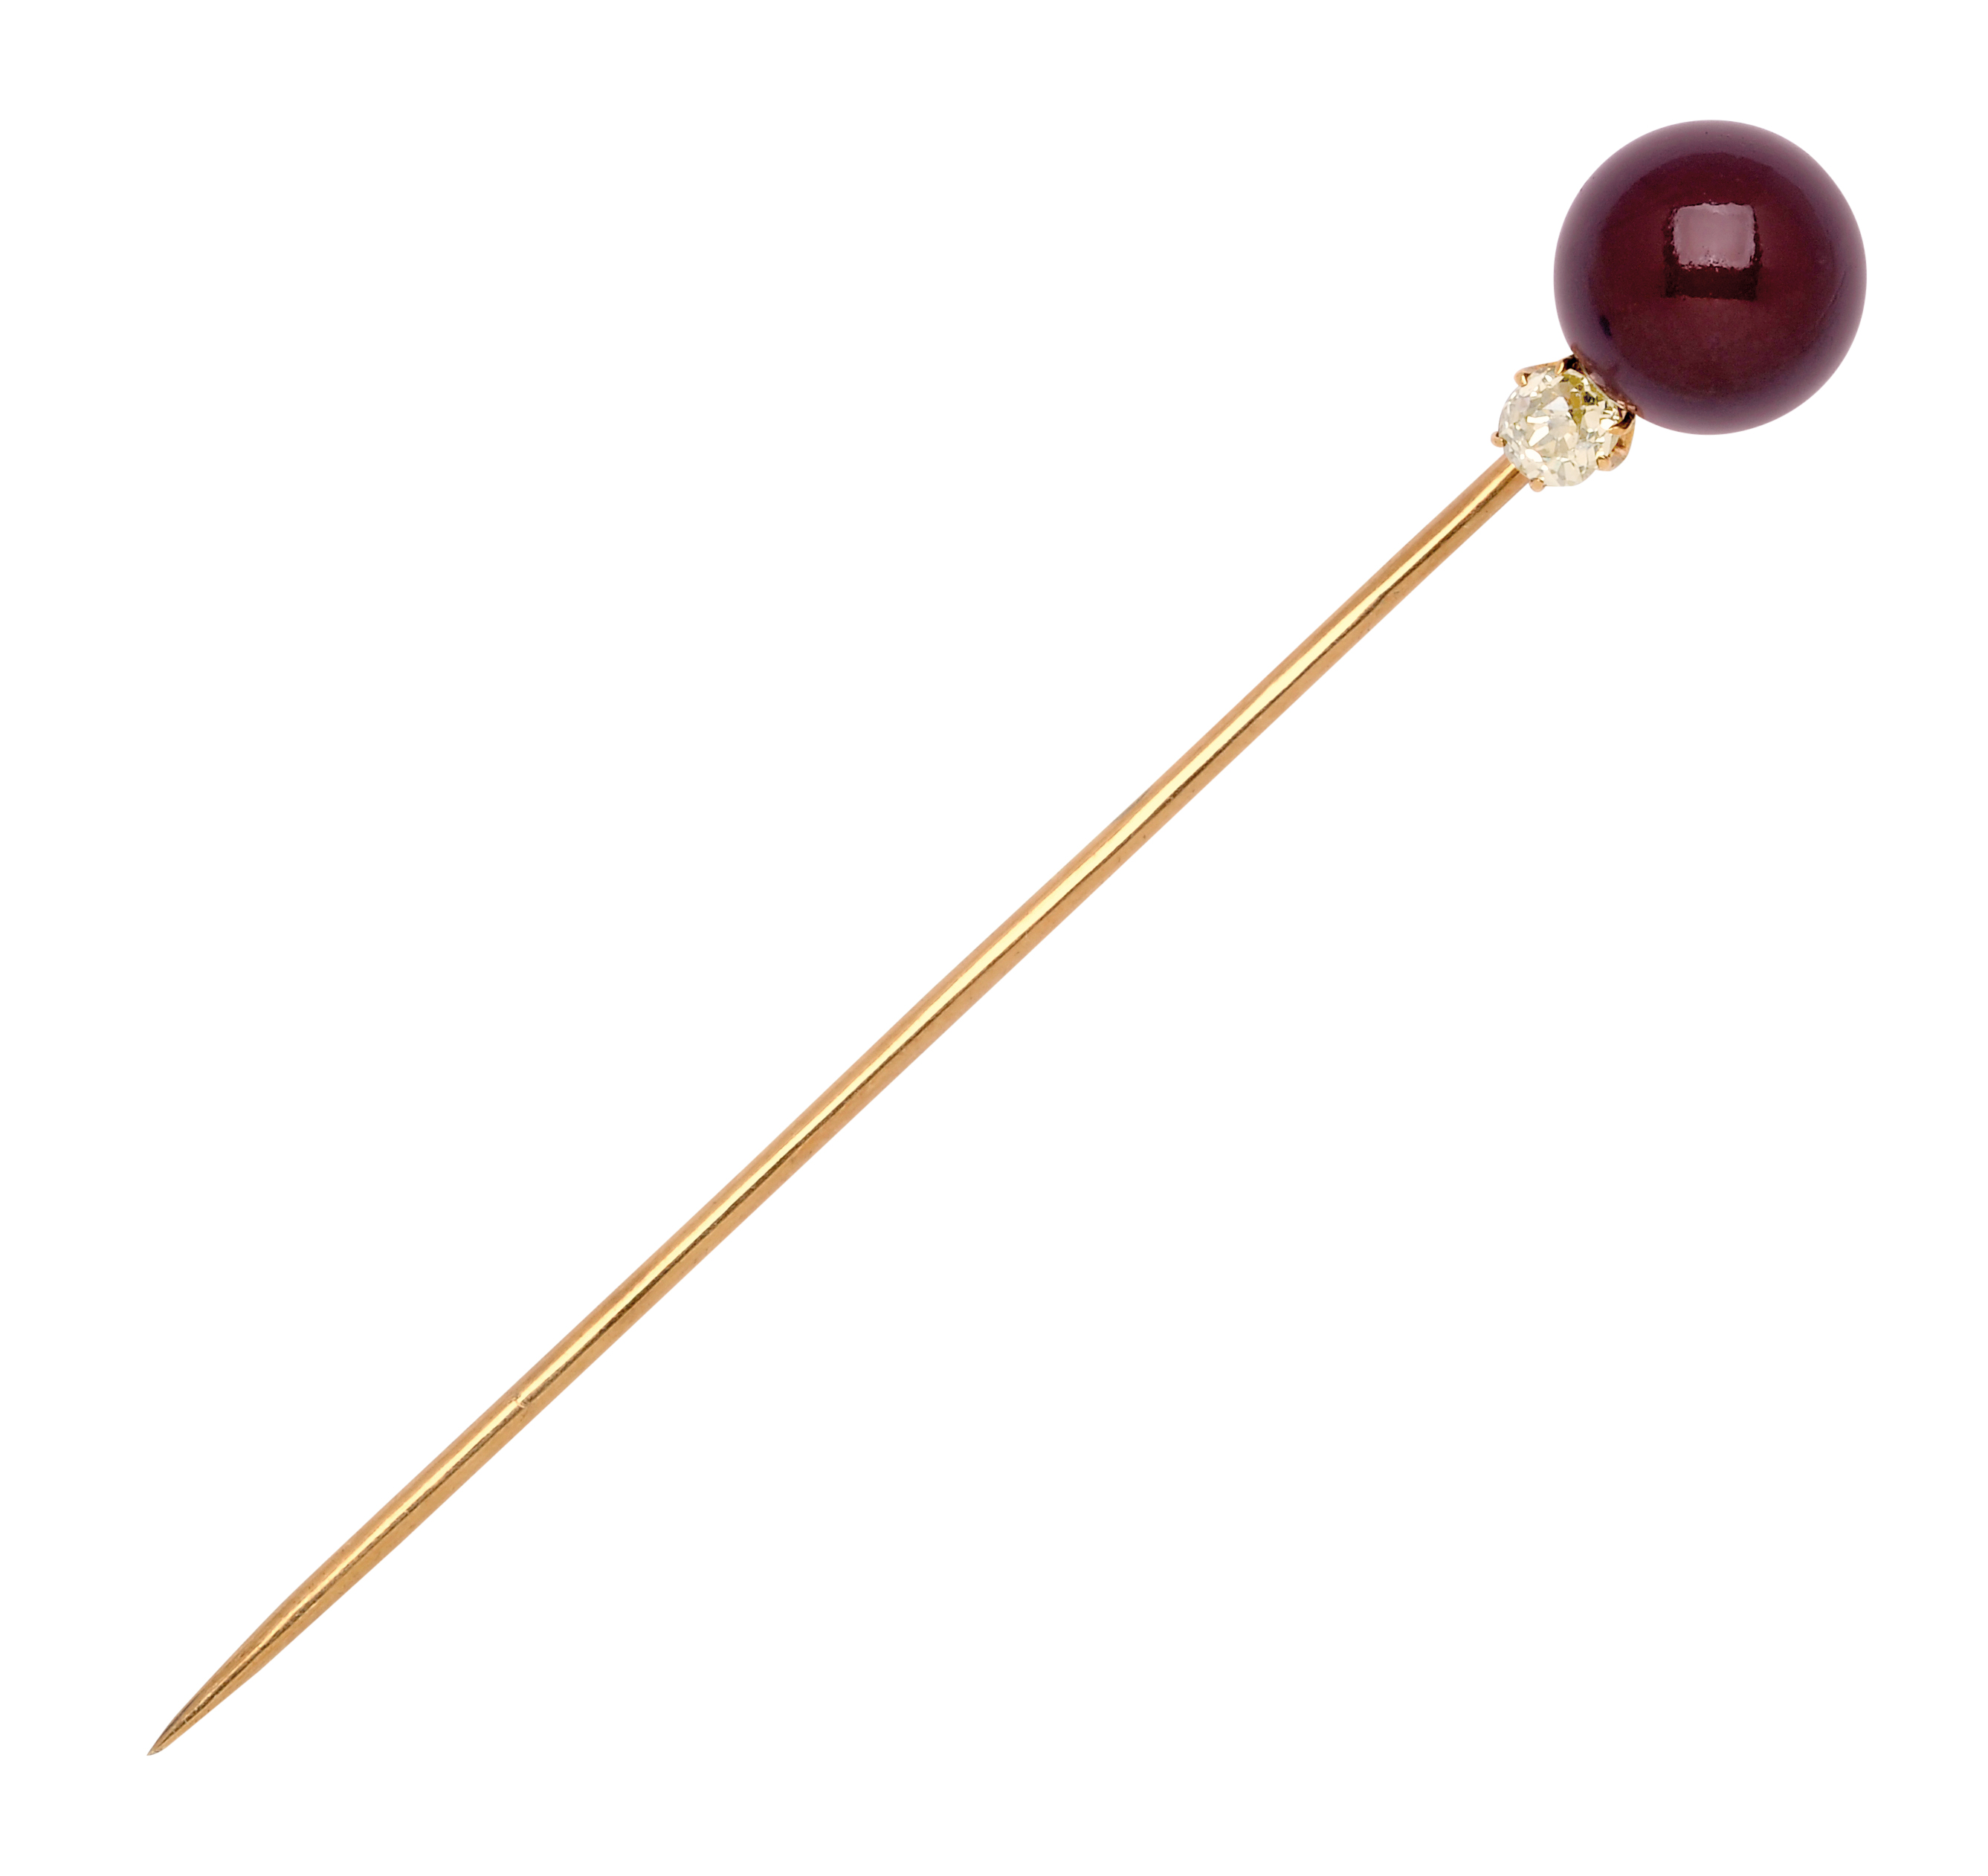 Antique Natural Pearl and Coloured Diamond Stickpin with a Quahog Pearl: Lot 119, Spring 2014 sale